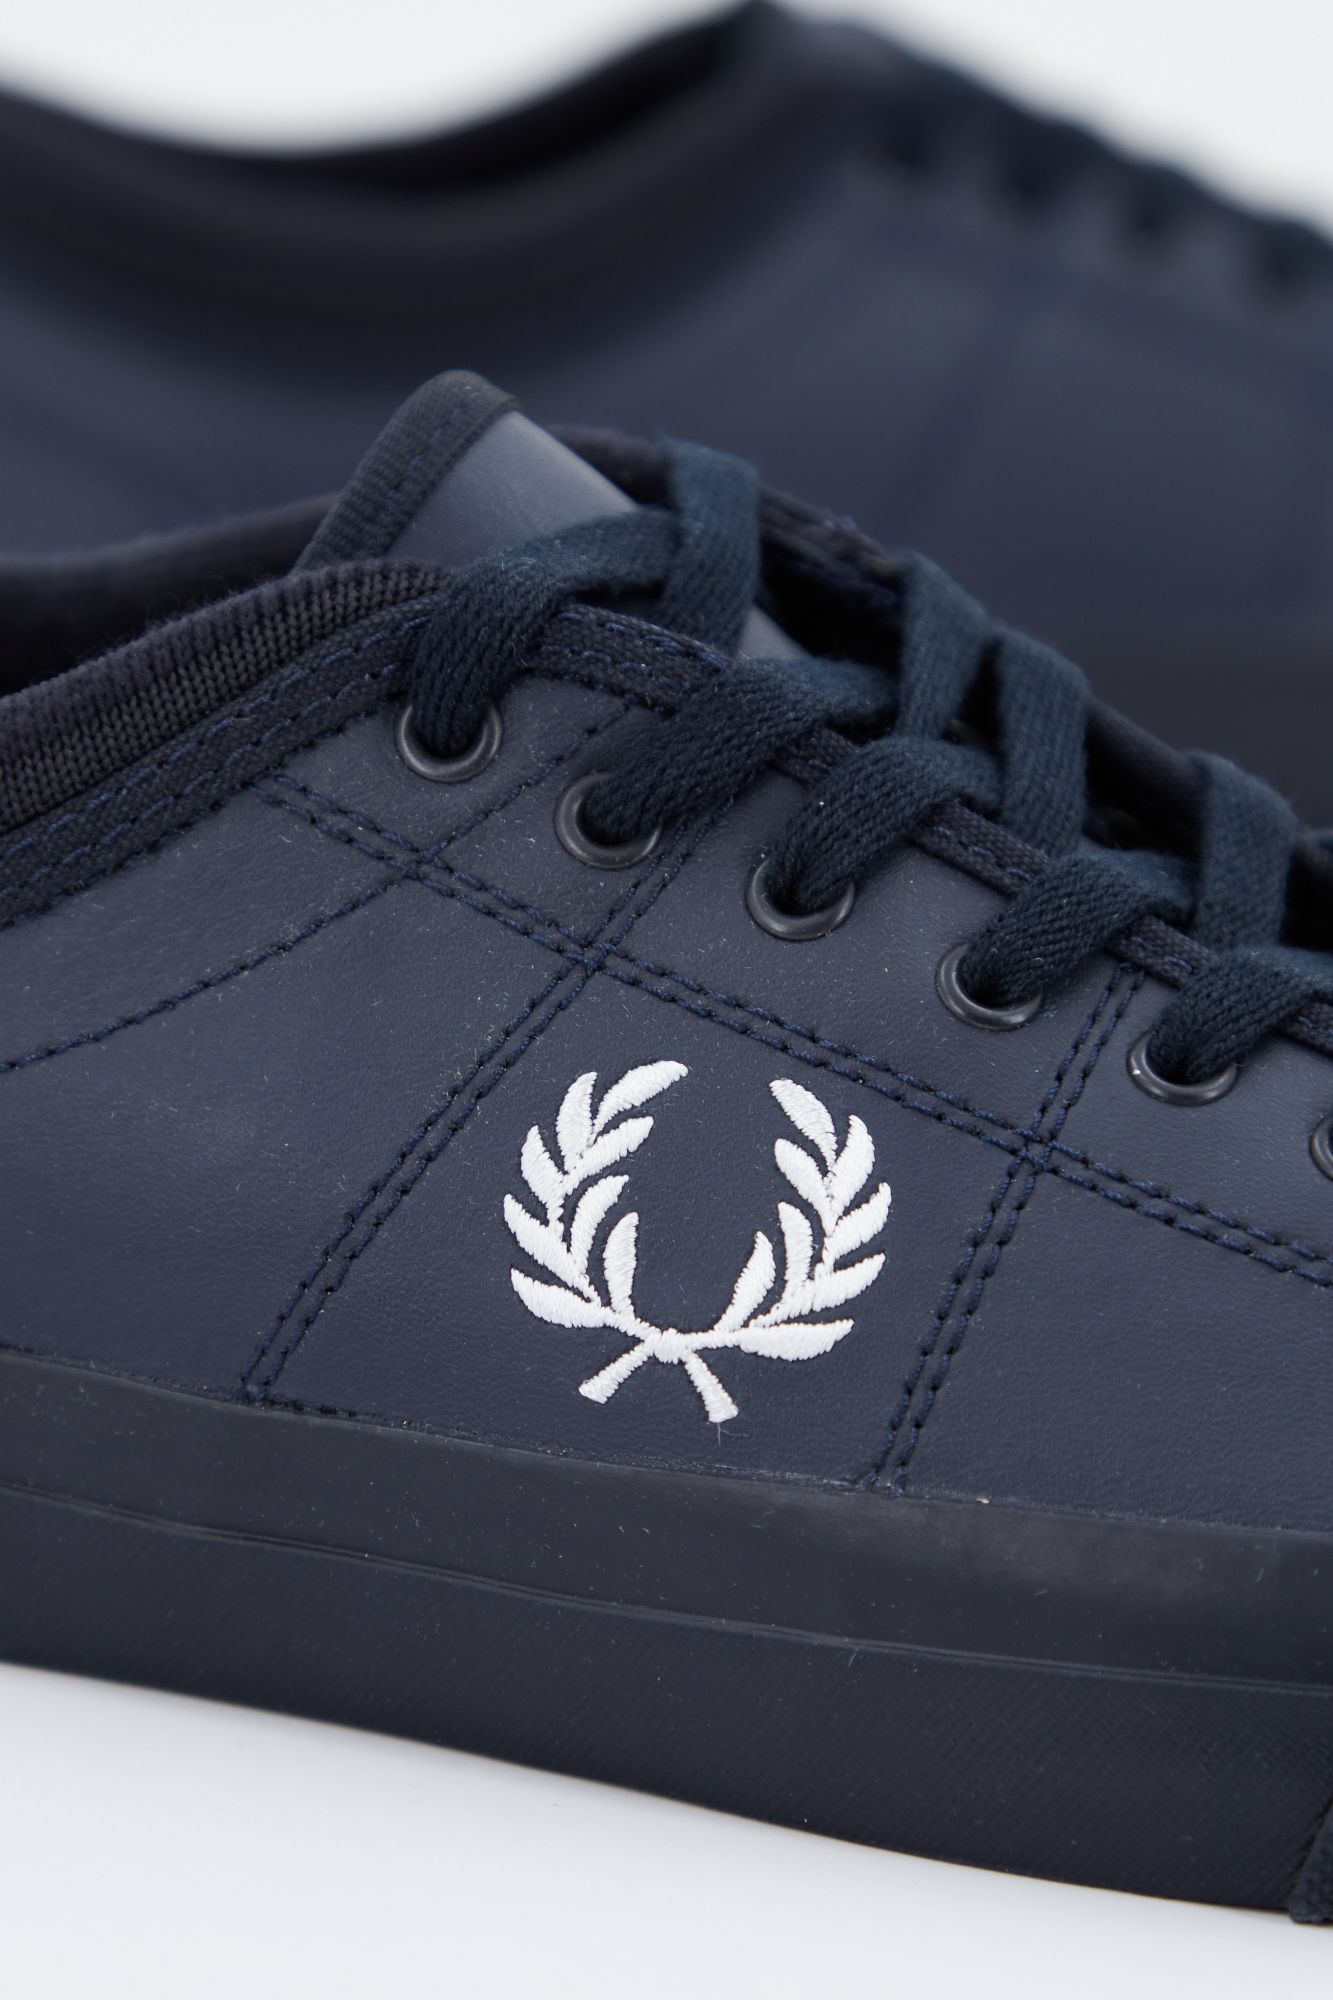 FRED PERRY  KENDRICK LEATHER en color AZUL (4)